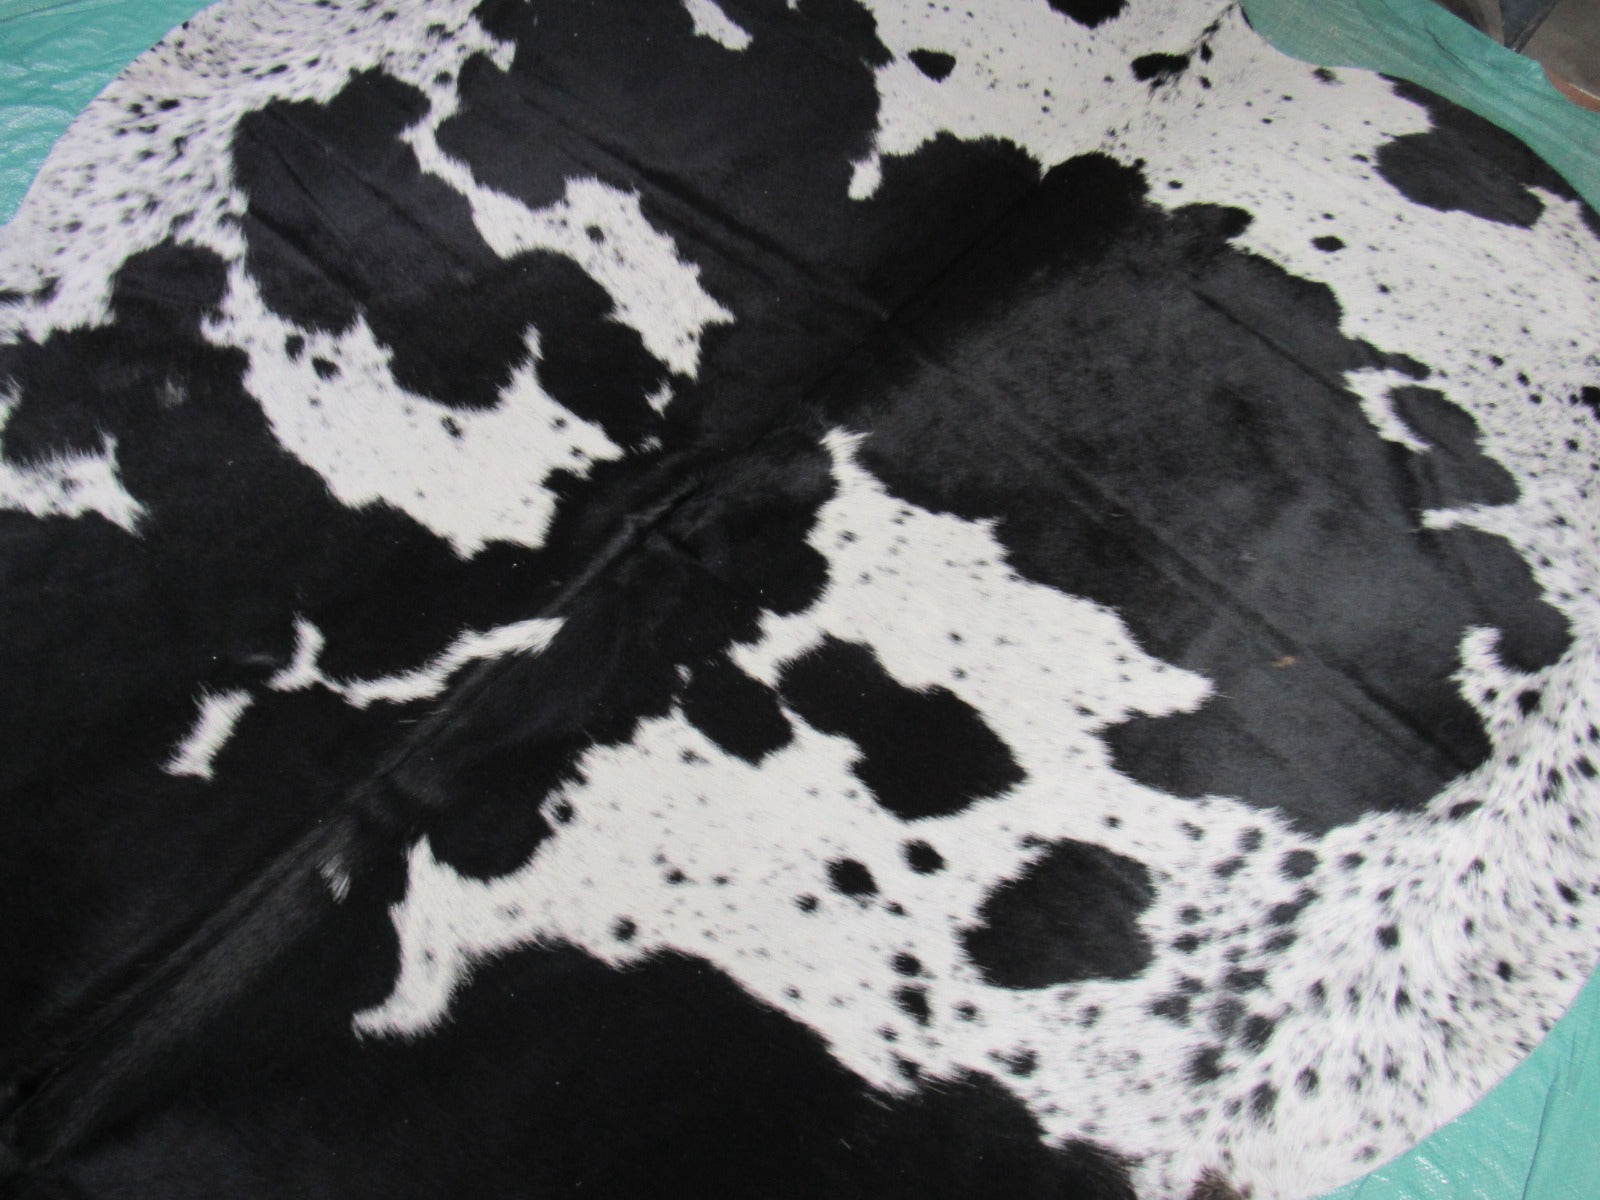 Spotted Black & White Cowhide Rug Size: 8x6.7 feet M-1269